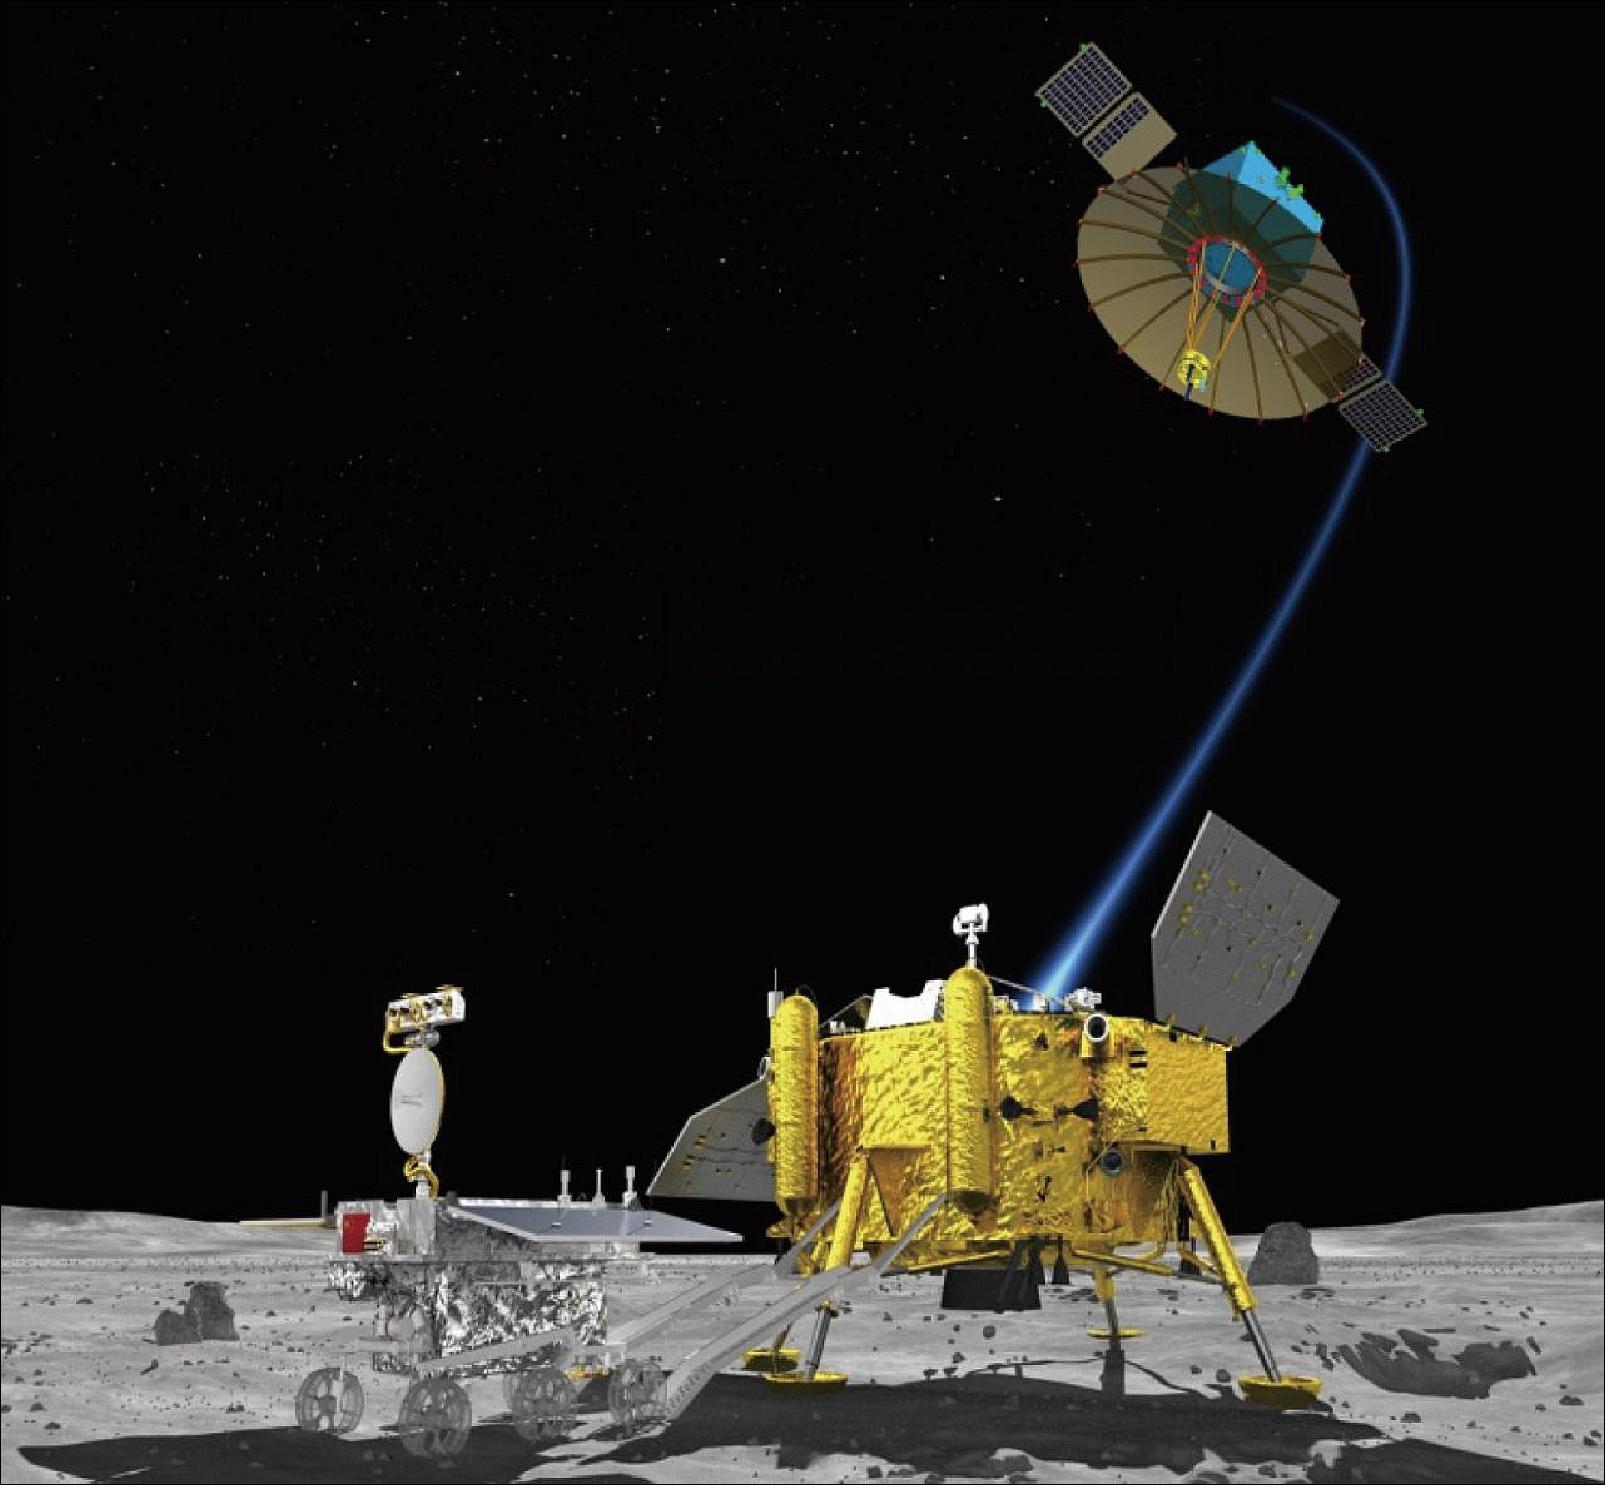 Figure 47: Artist's rendering of the Chang'e-4 relay satellite, launched in May 2018, and lander and rover to set down on the lunar far side in late 2018 (image credit: CAS)